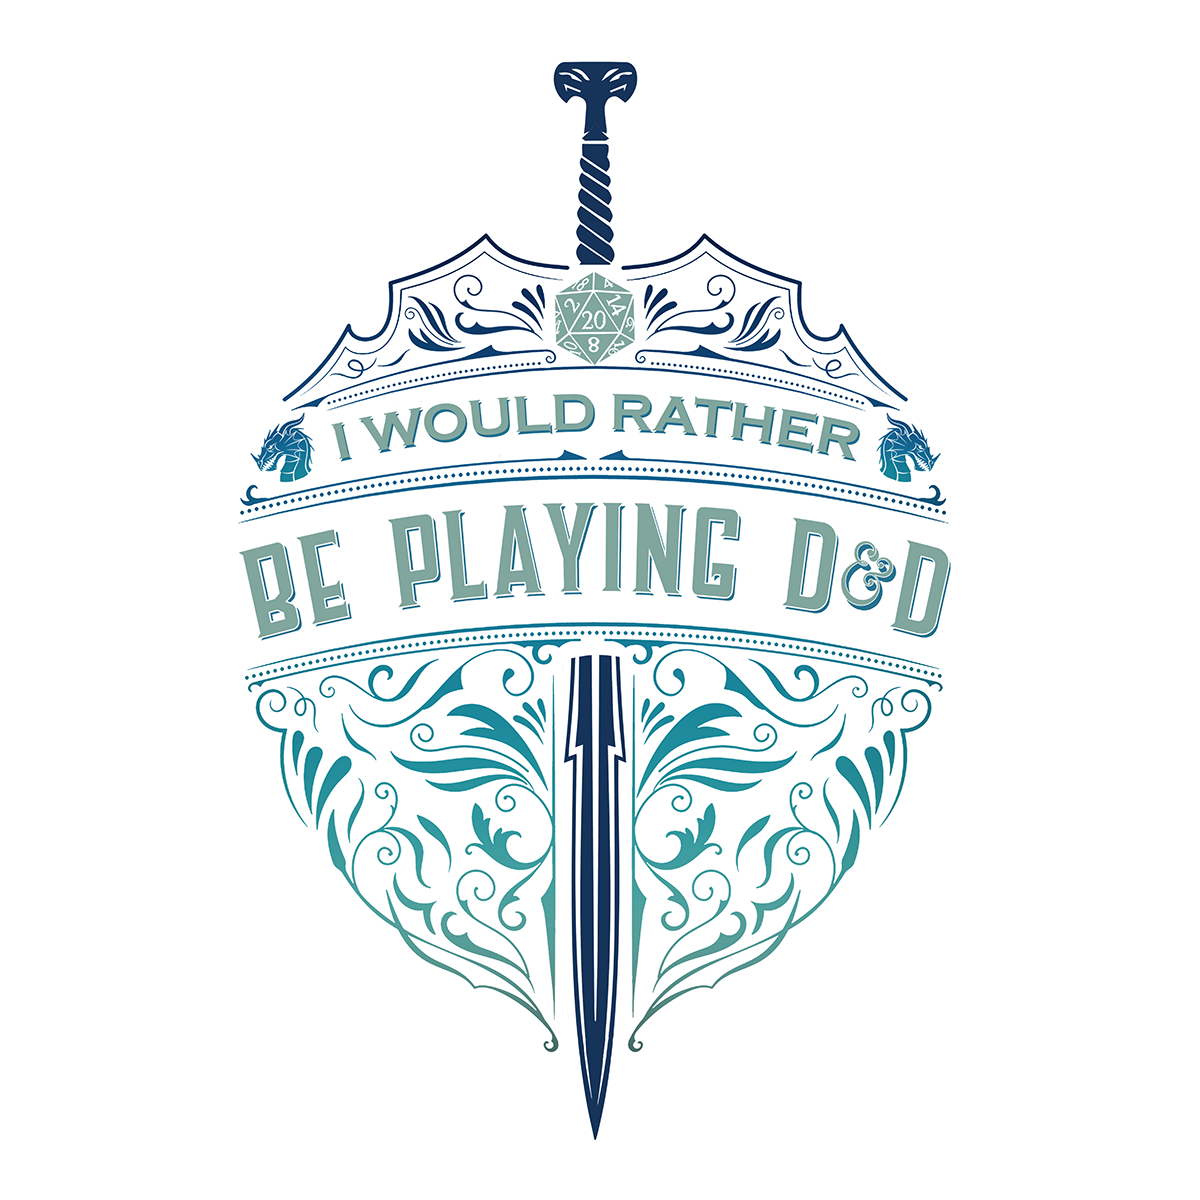 I would Rather Be Playing D&D Sticker